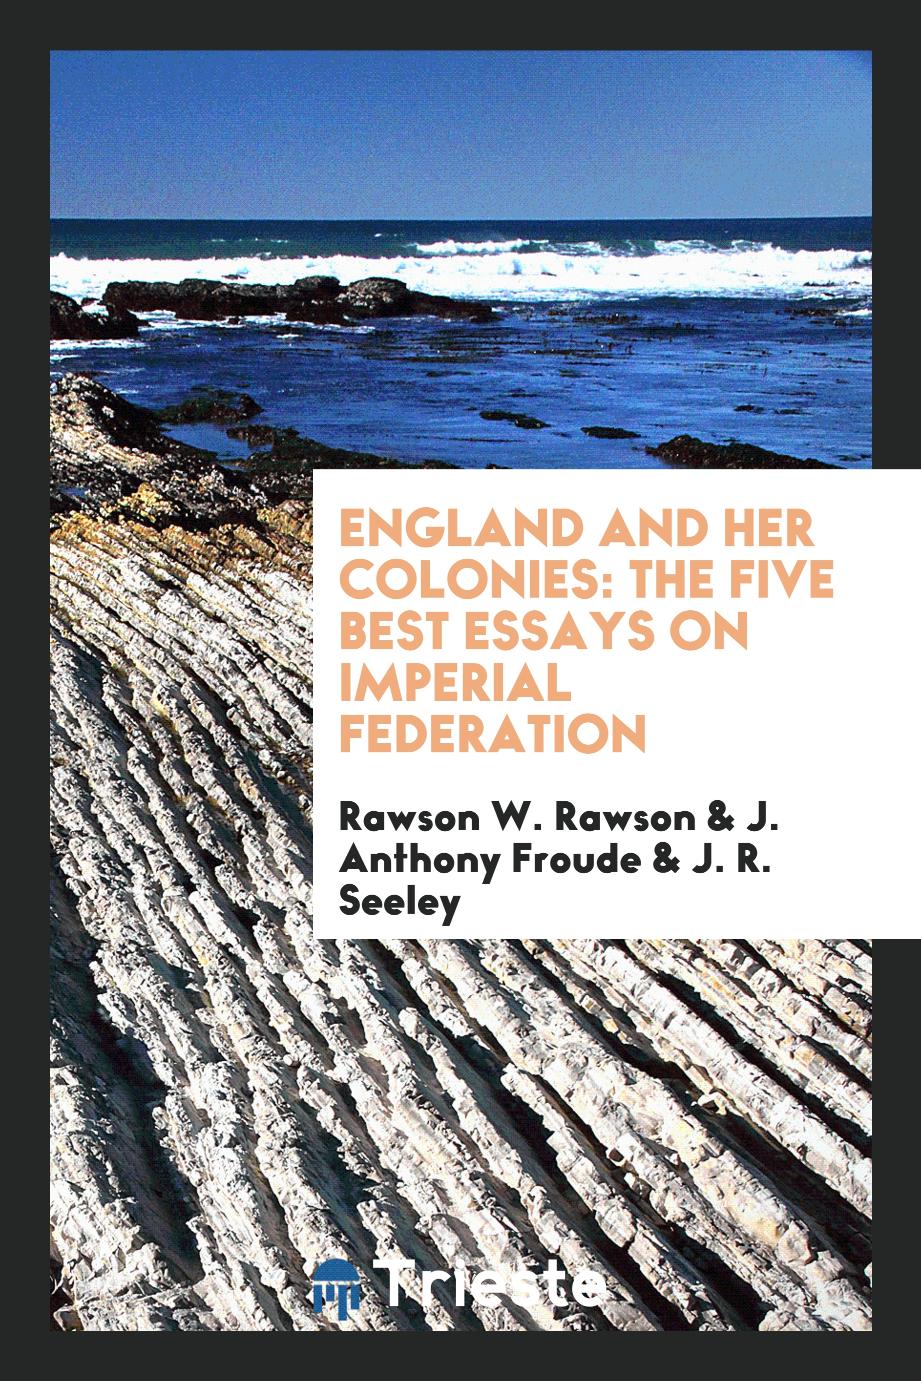 England and Her Colonies: The Five Best Essays on Imperial Federation